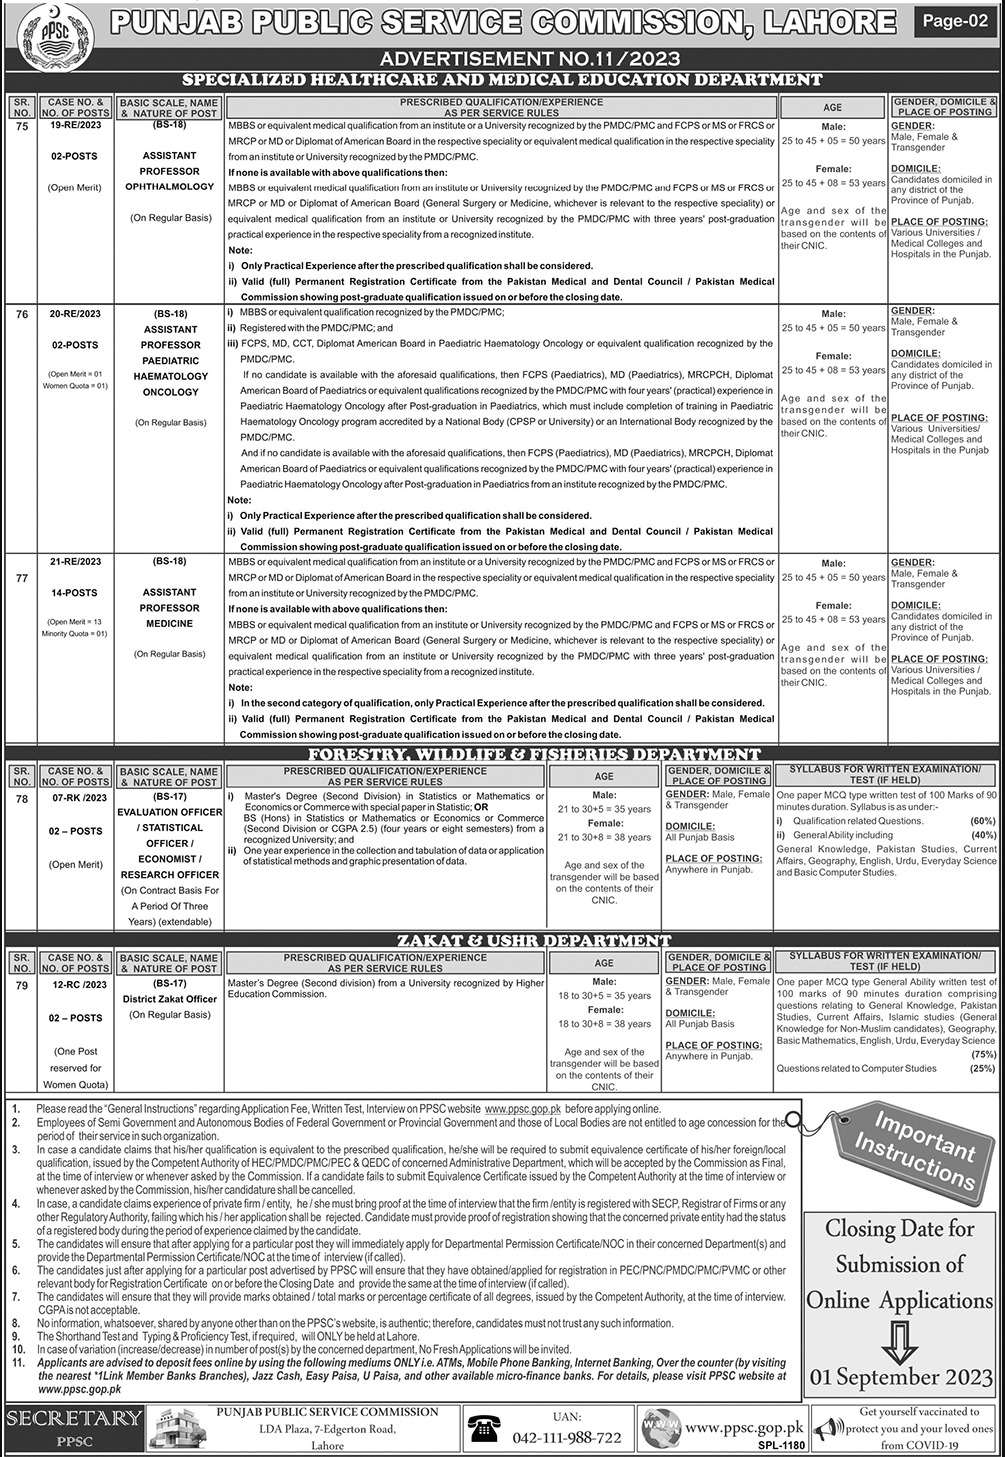 PPSC Jobs 2023 - Latest Opportunities with Punjab Public Service Commission